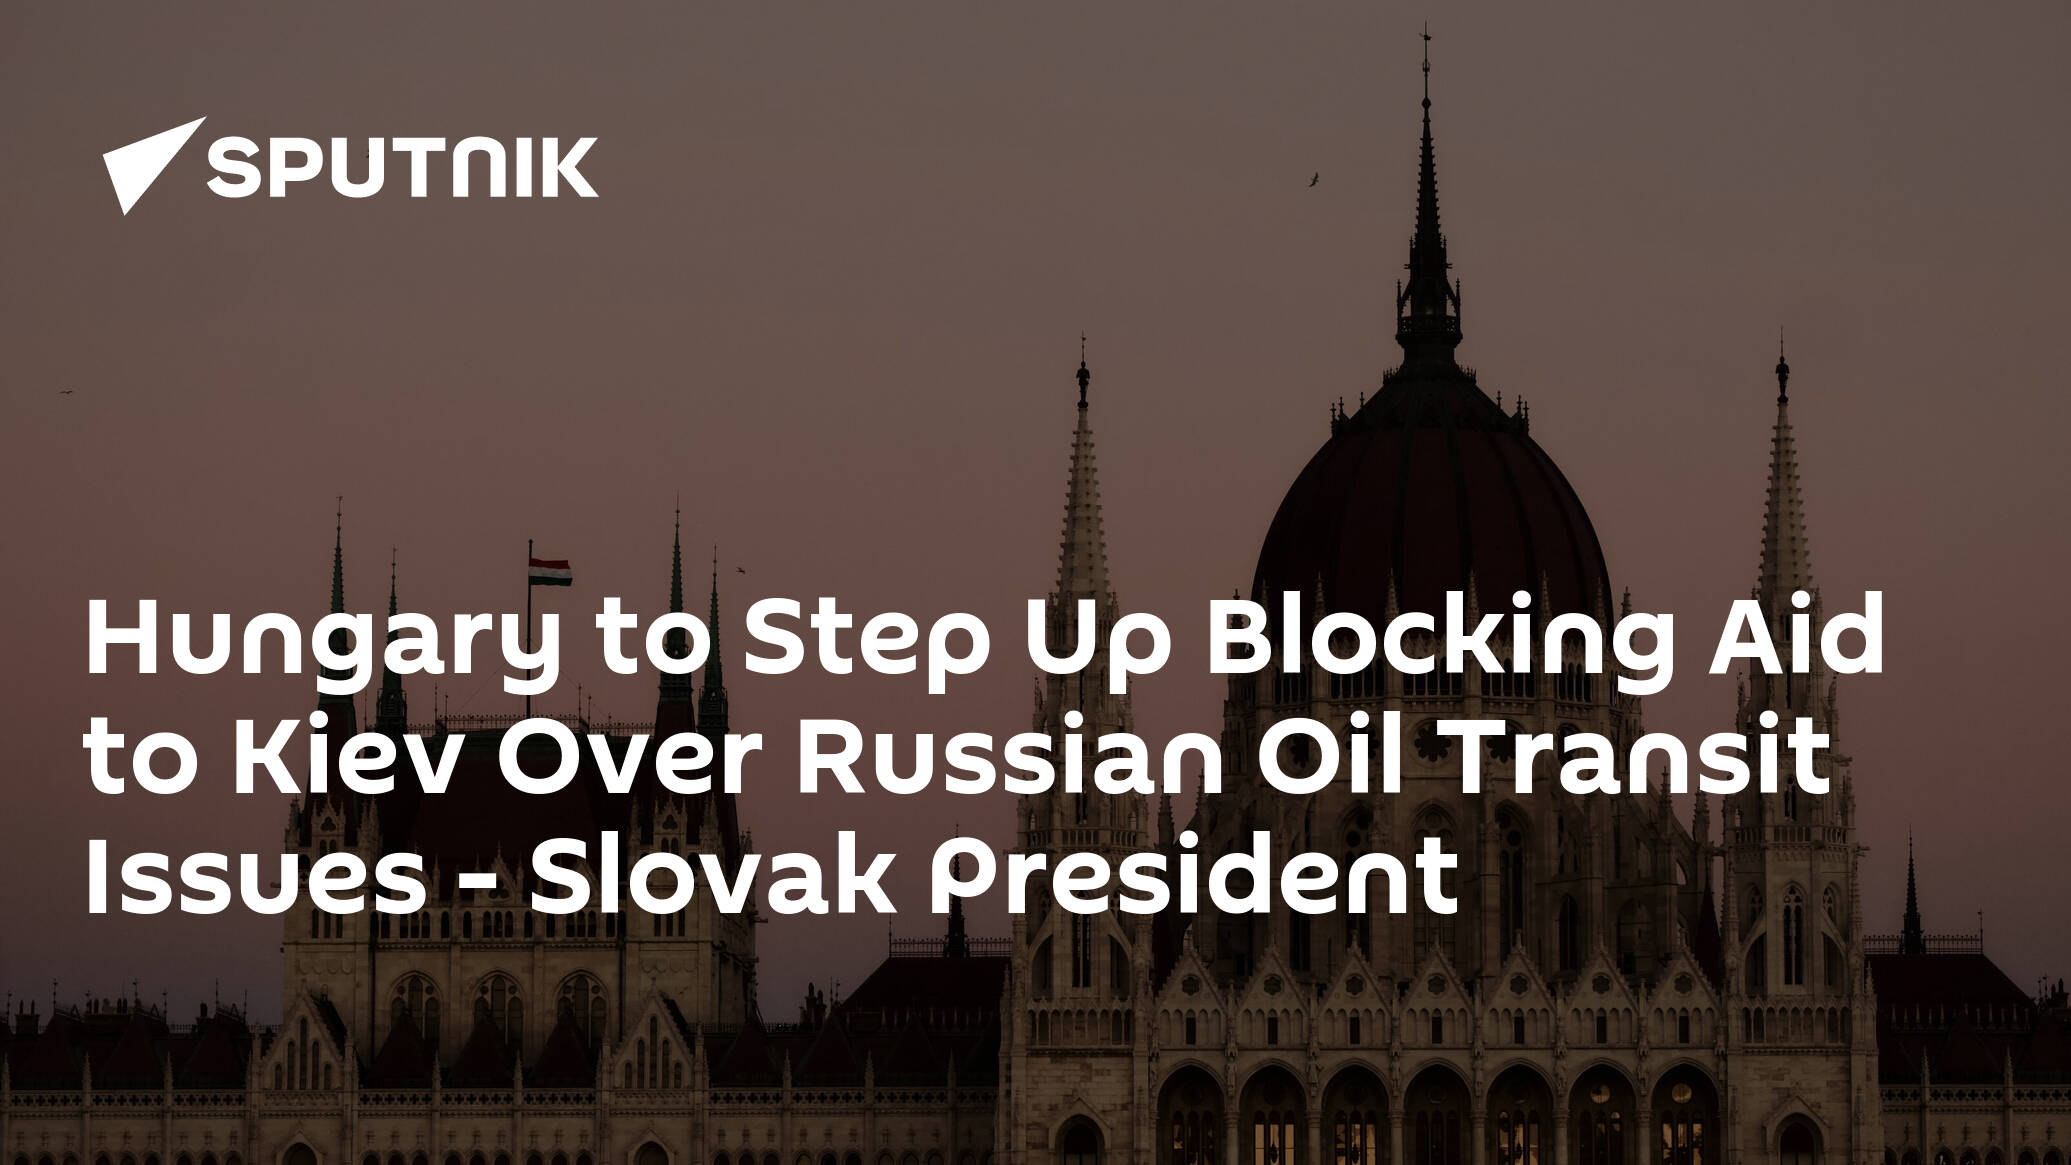 Hungary to Step Up Blocking Aid to Kiev Over Russian Oil Transit Issues - Slovak President